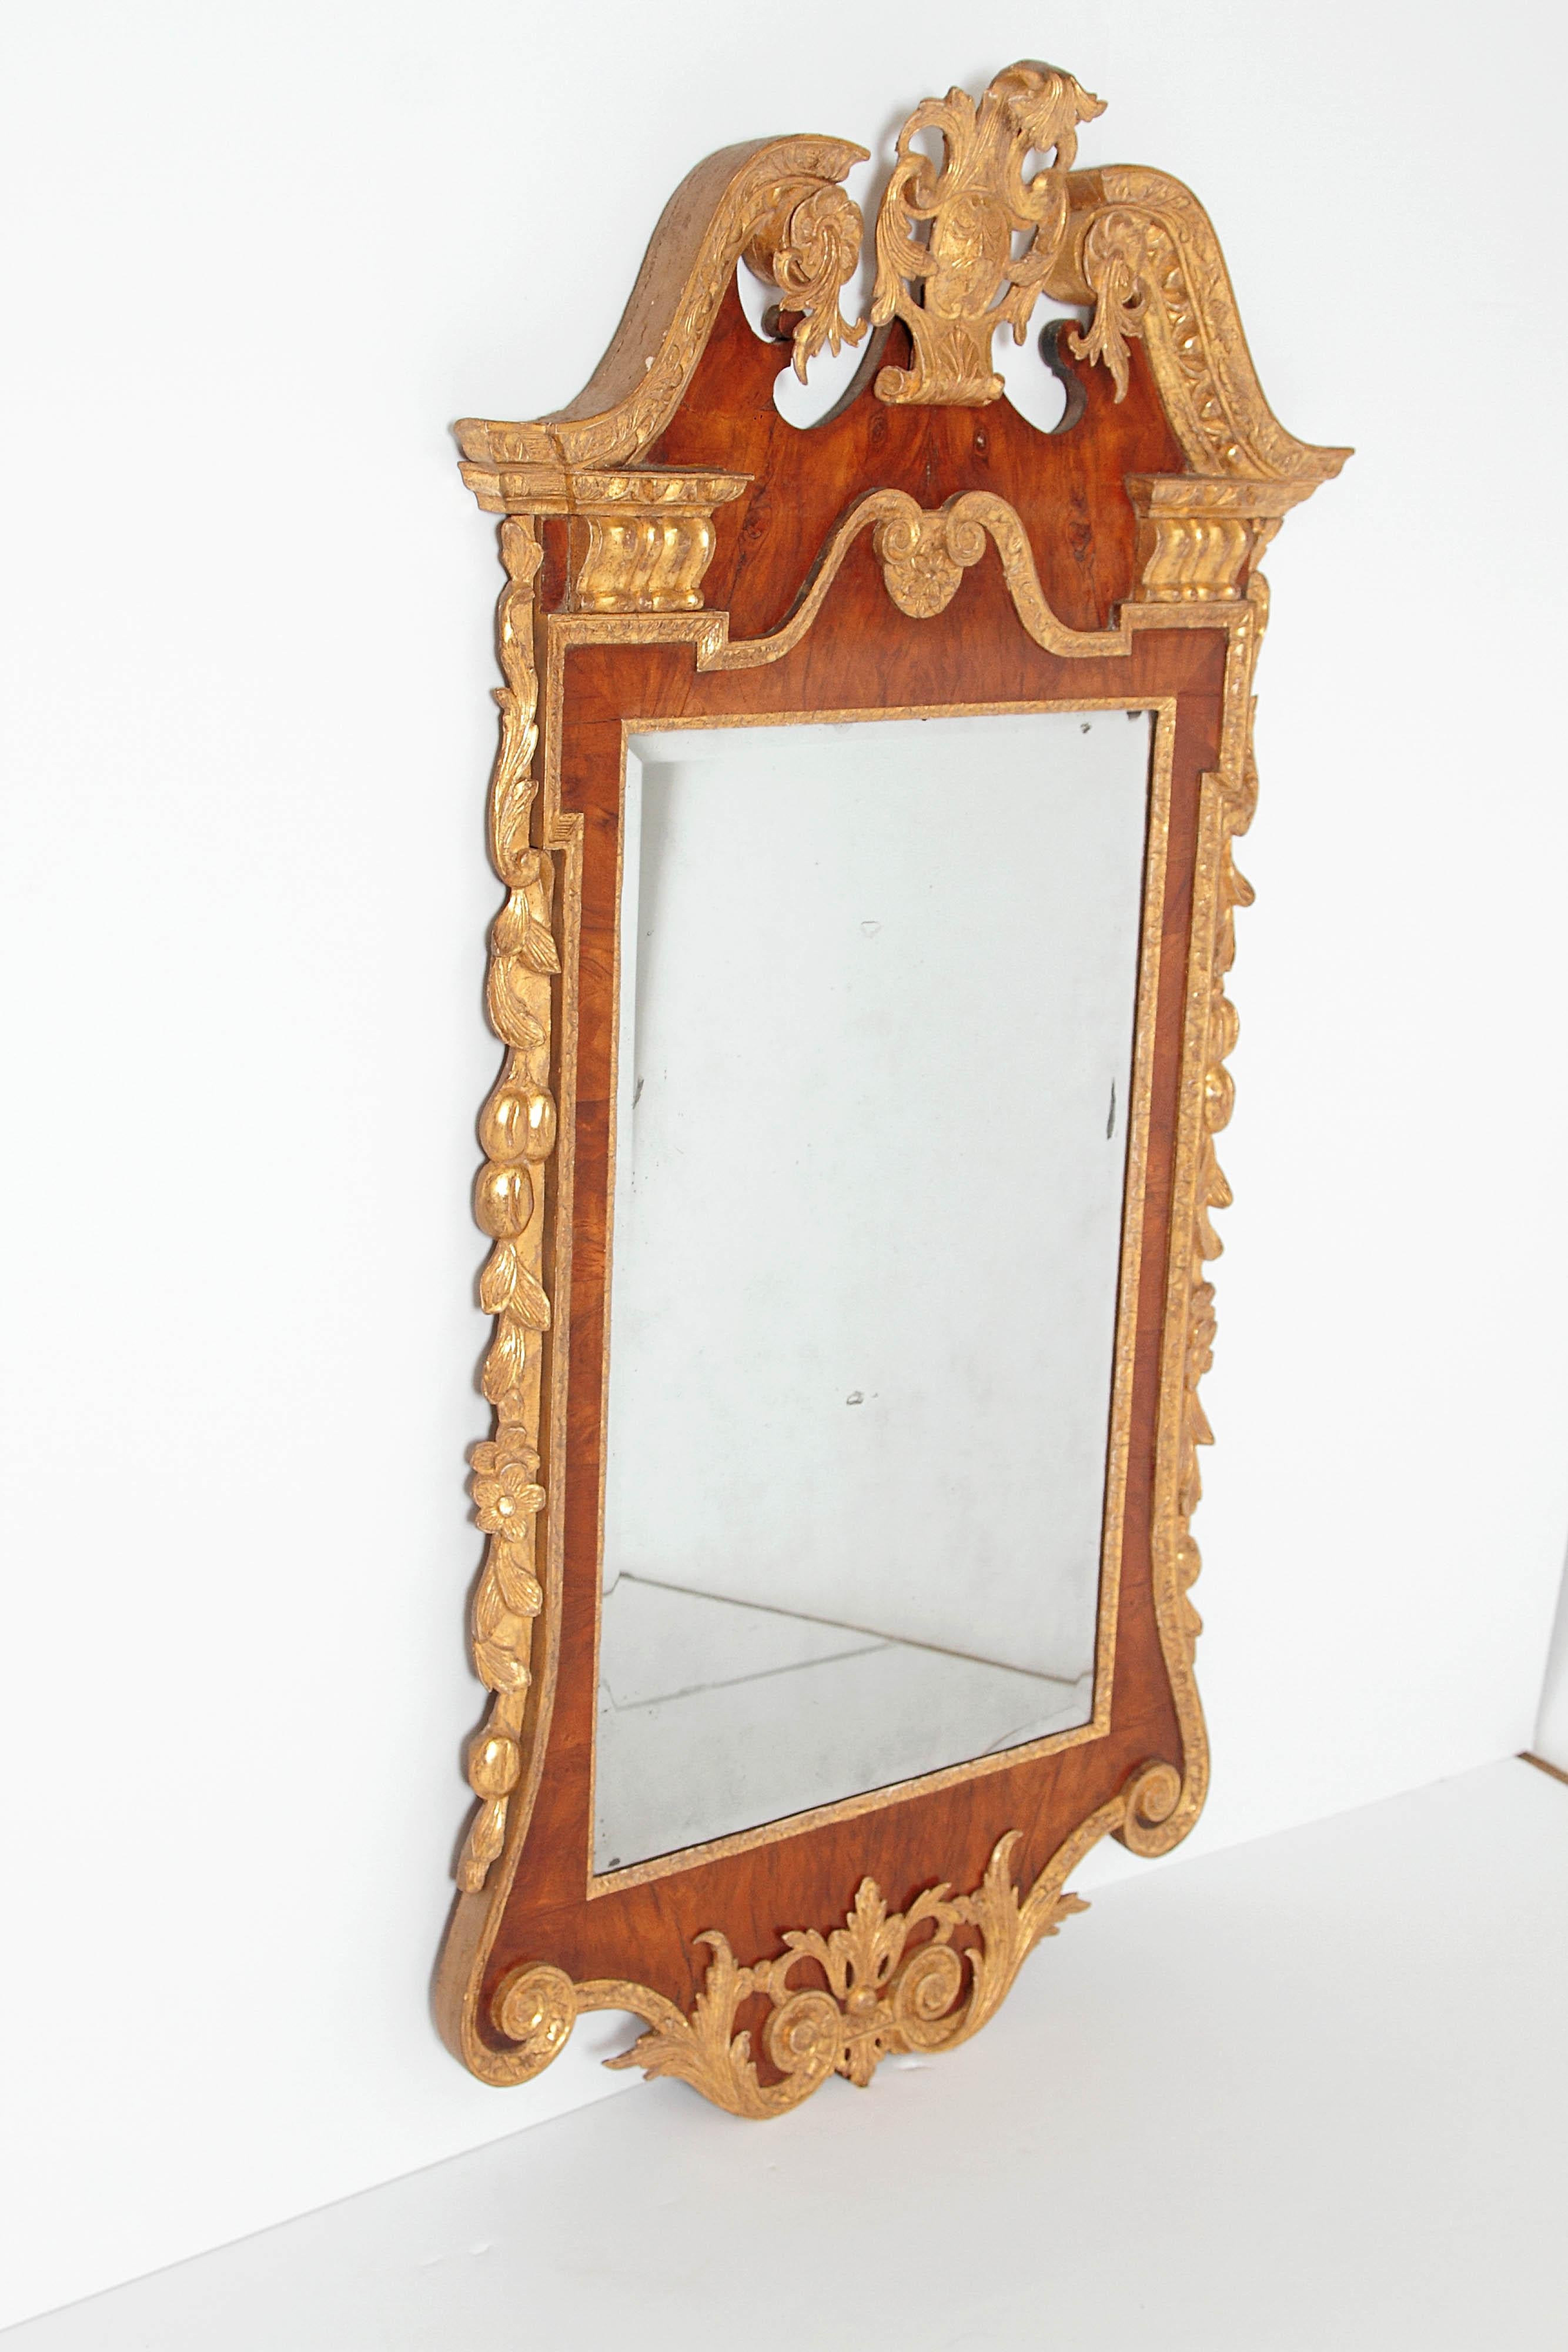 English Period George II Pier Glass with Bookmatched Walnut Veneers